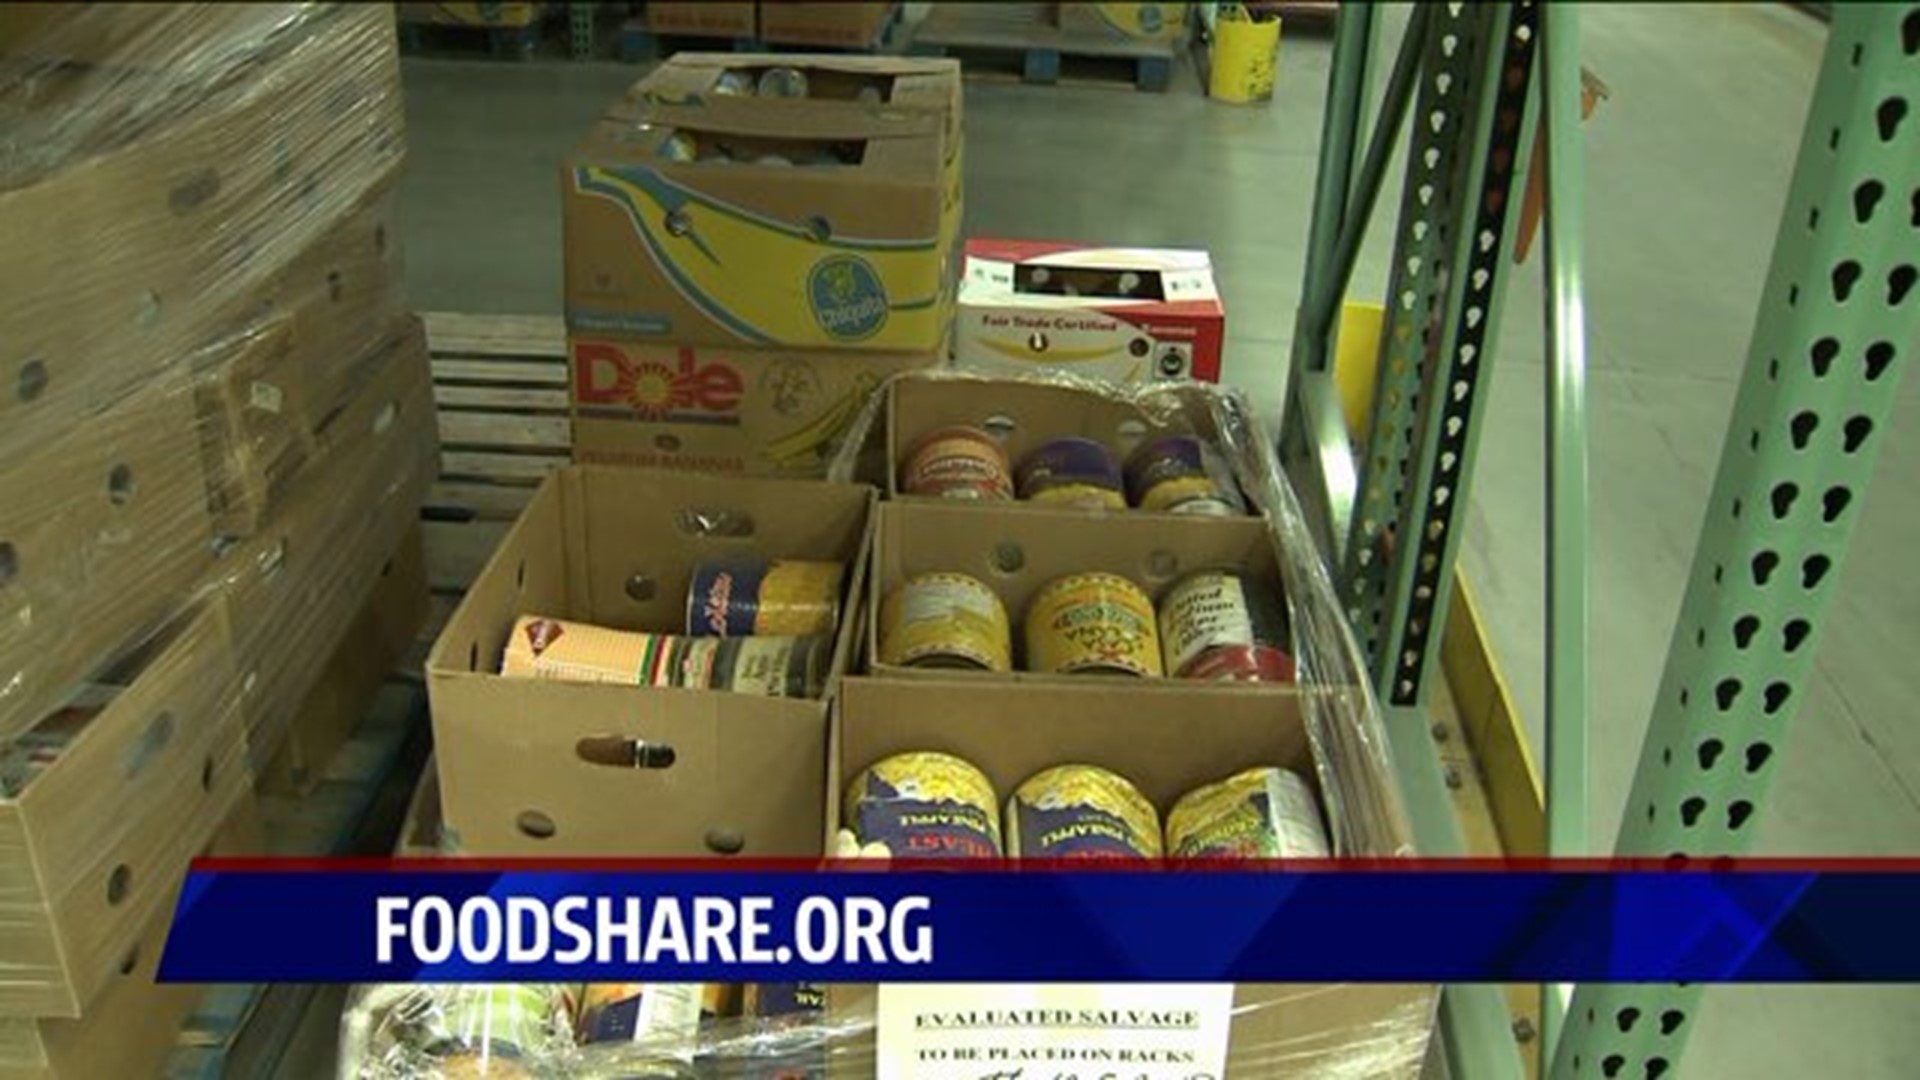 Foodshare has a plan to wipe out hunger